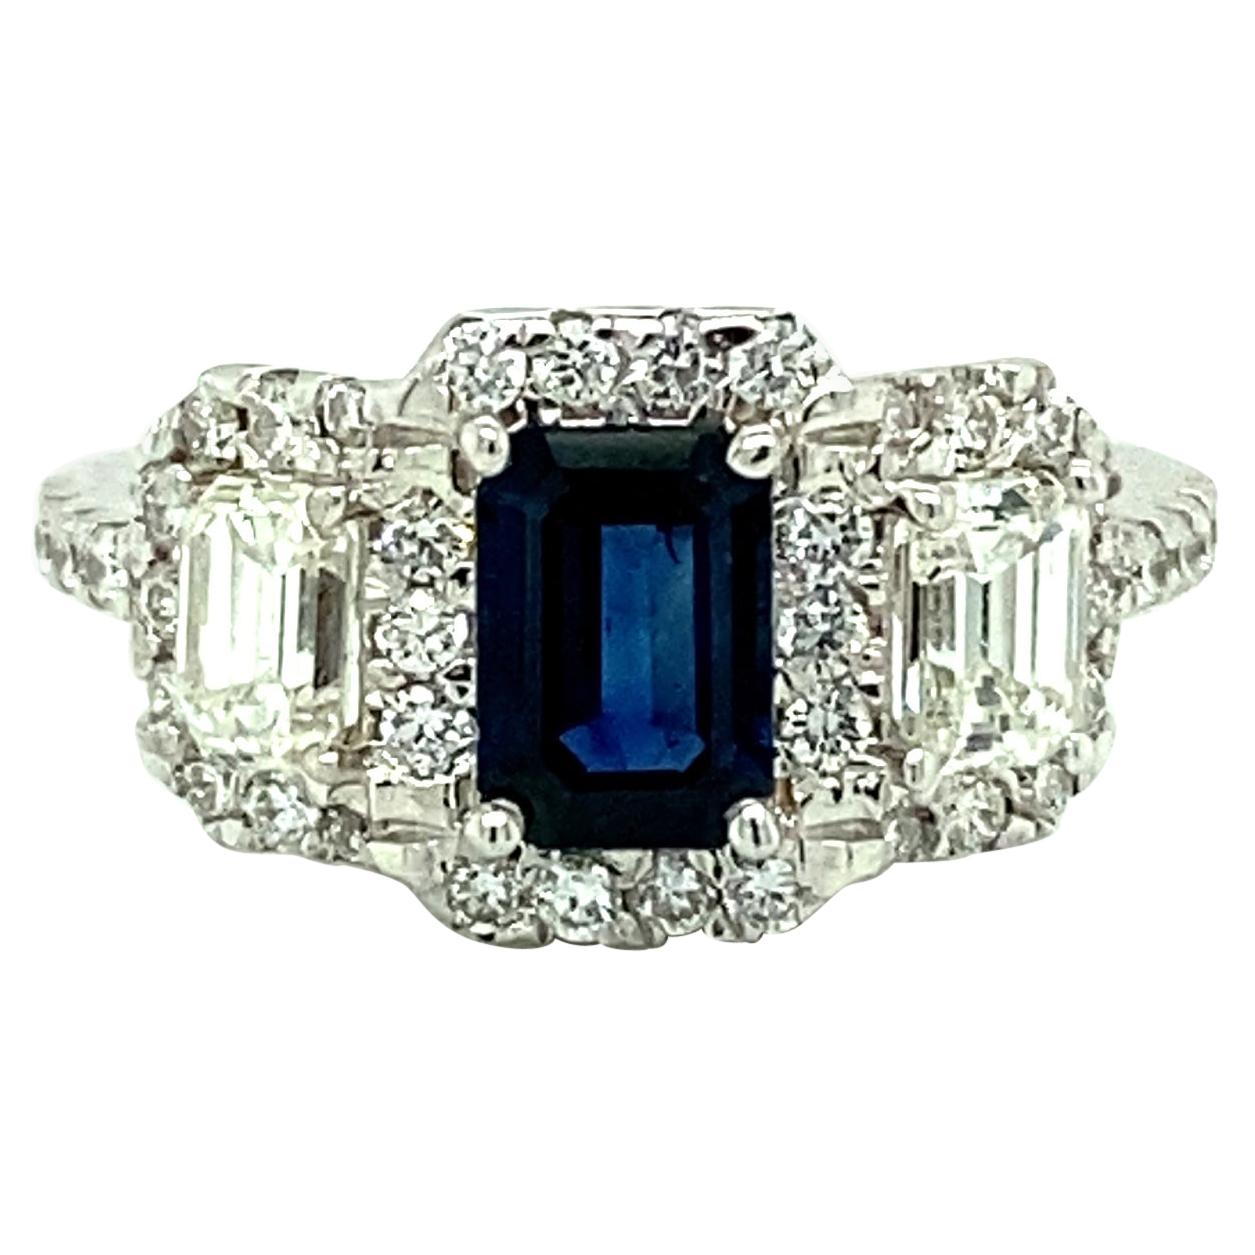 Emerald Cut Sapphire and Diamond Ring, 18kt White Gold Engagement Ring